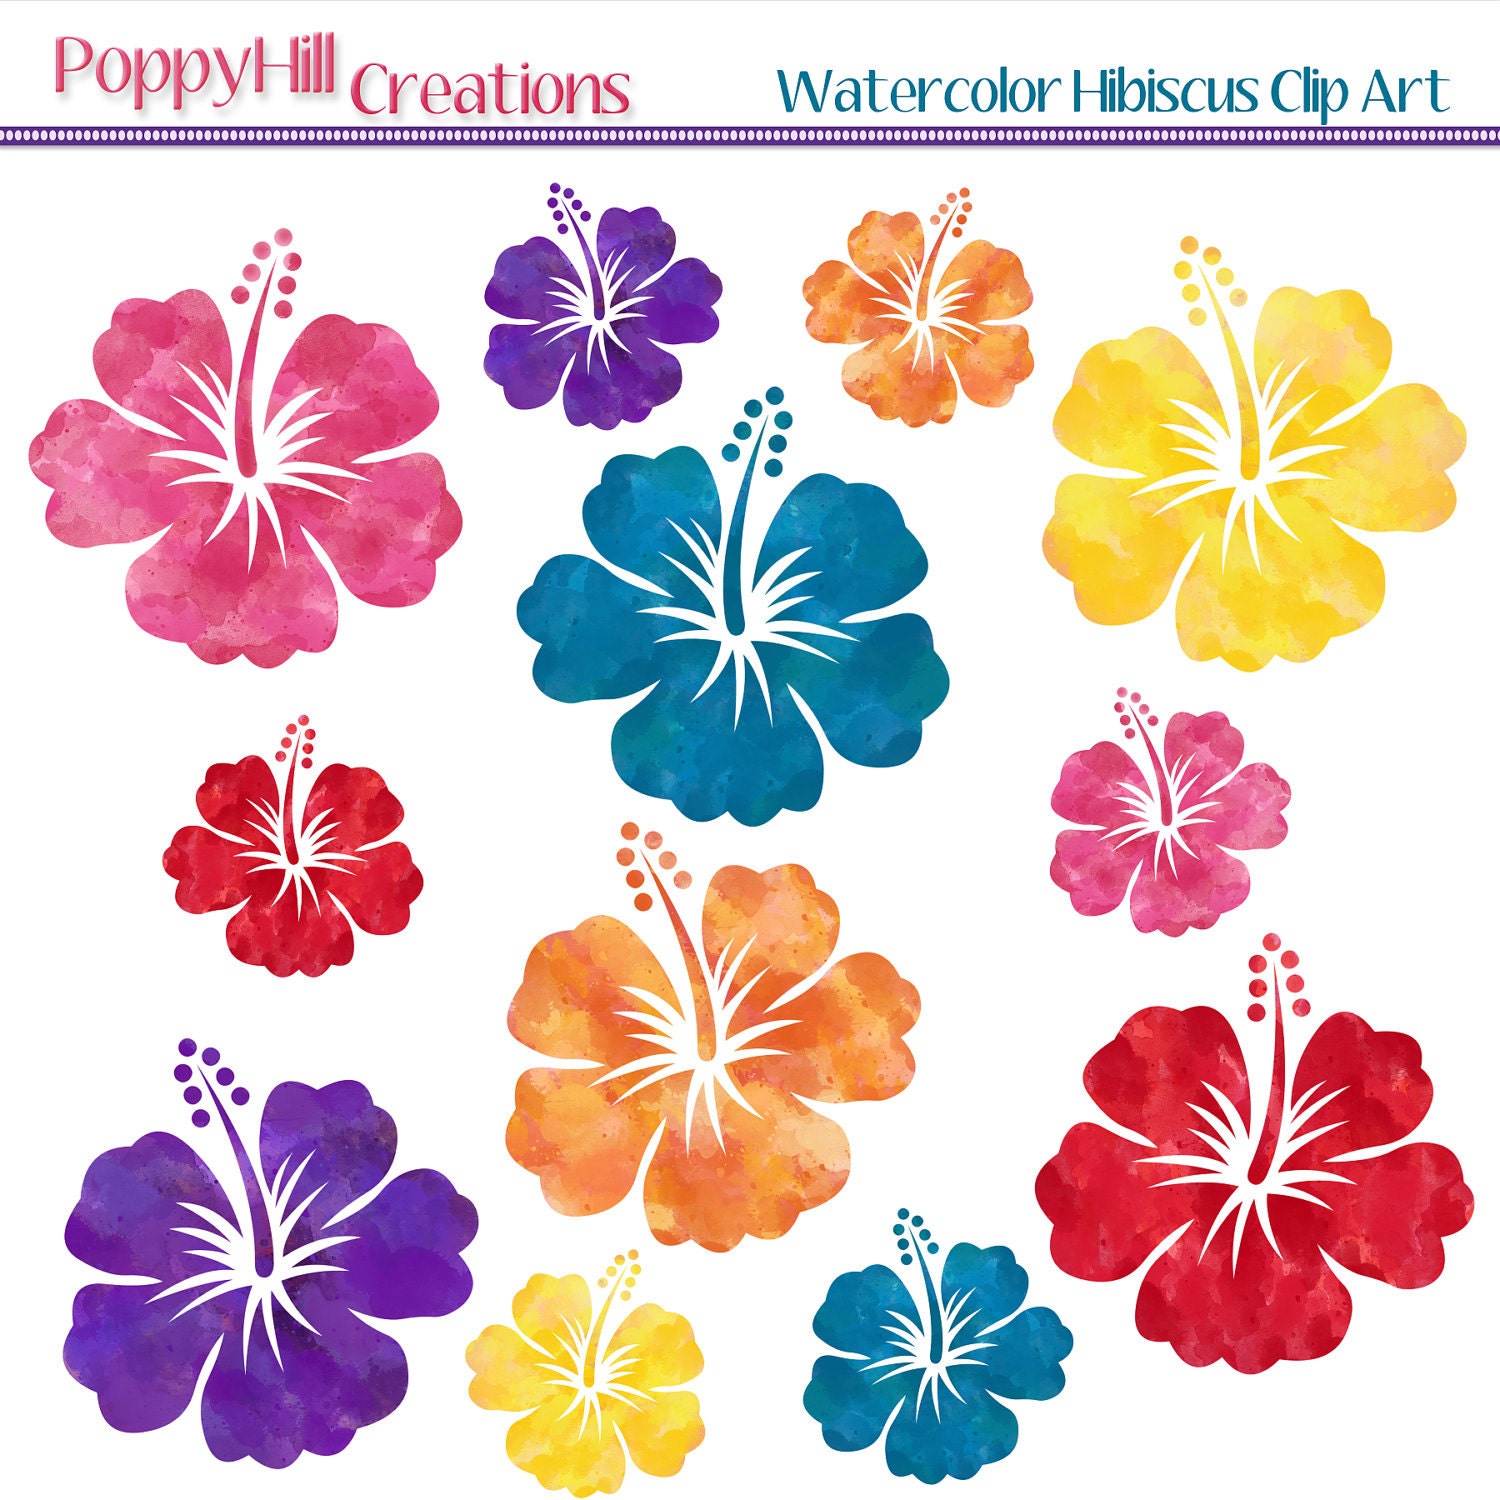 Watercolor Hibiscus Digital Clip Art - Red, Yellow, Orange, Pink, Purple, Teal - For Personal and Commercial Use - Digital Designs